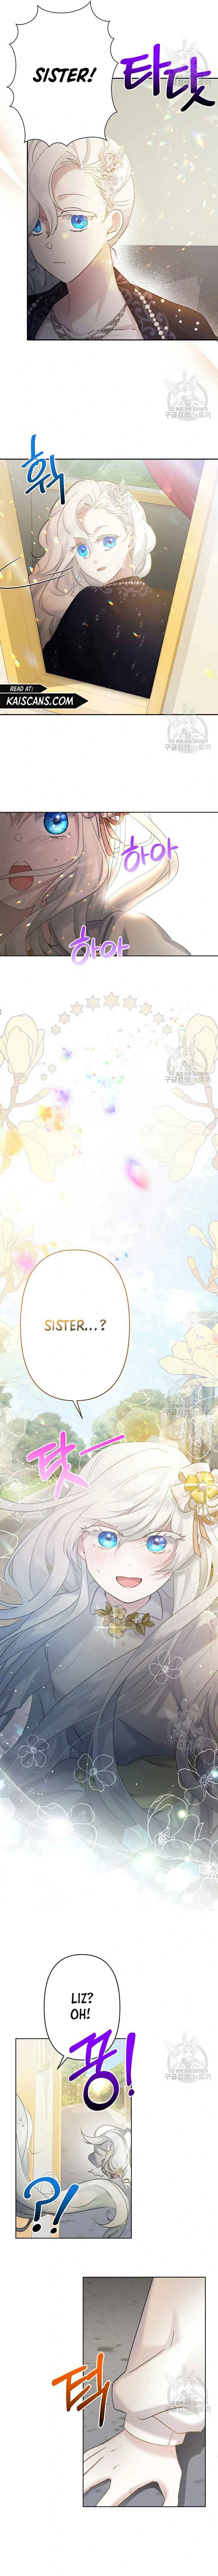 I Need to Raise My Sister Properly chapter 10